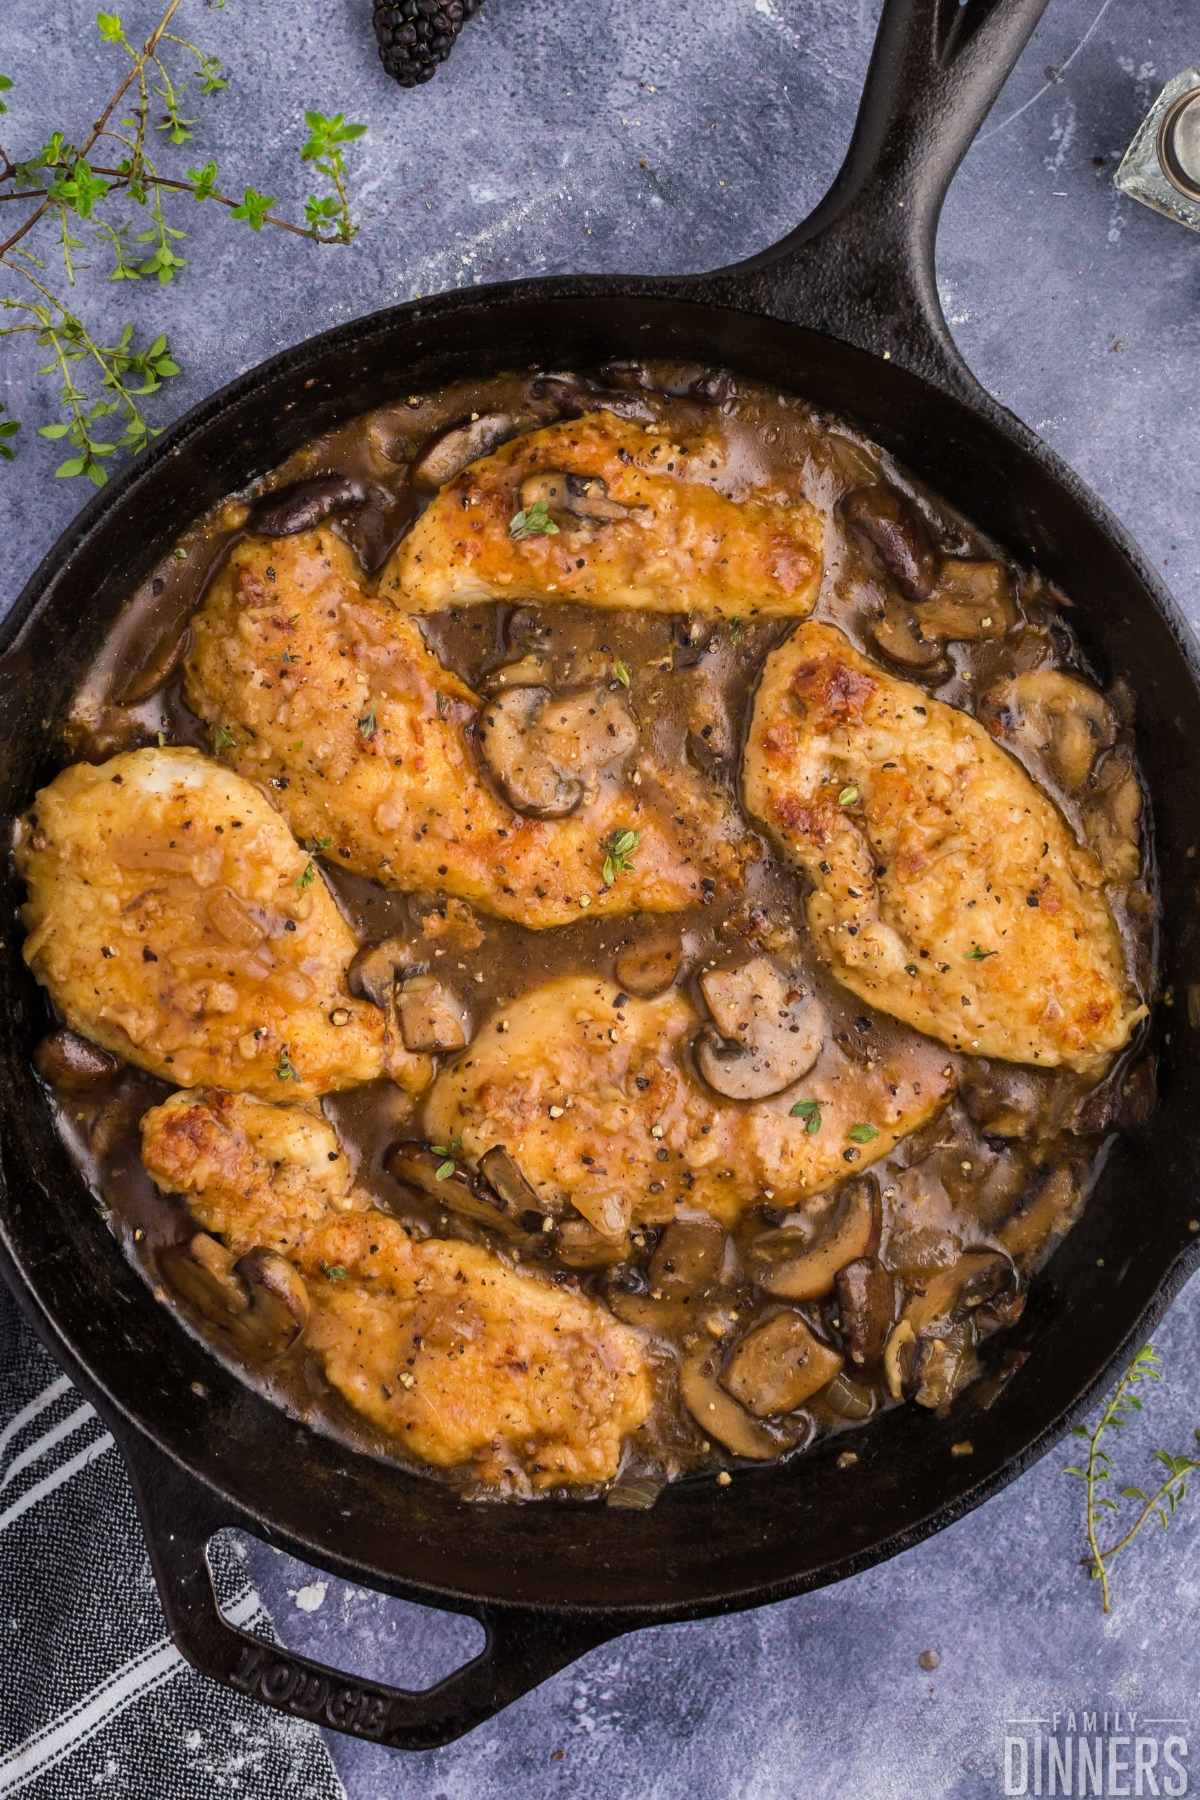 Golden cooked chicken surrounded by mushroom sauce in black cast iron pan.